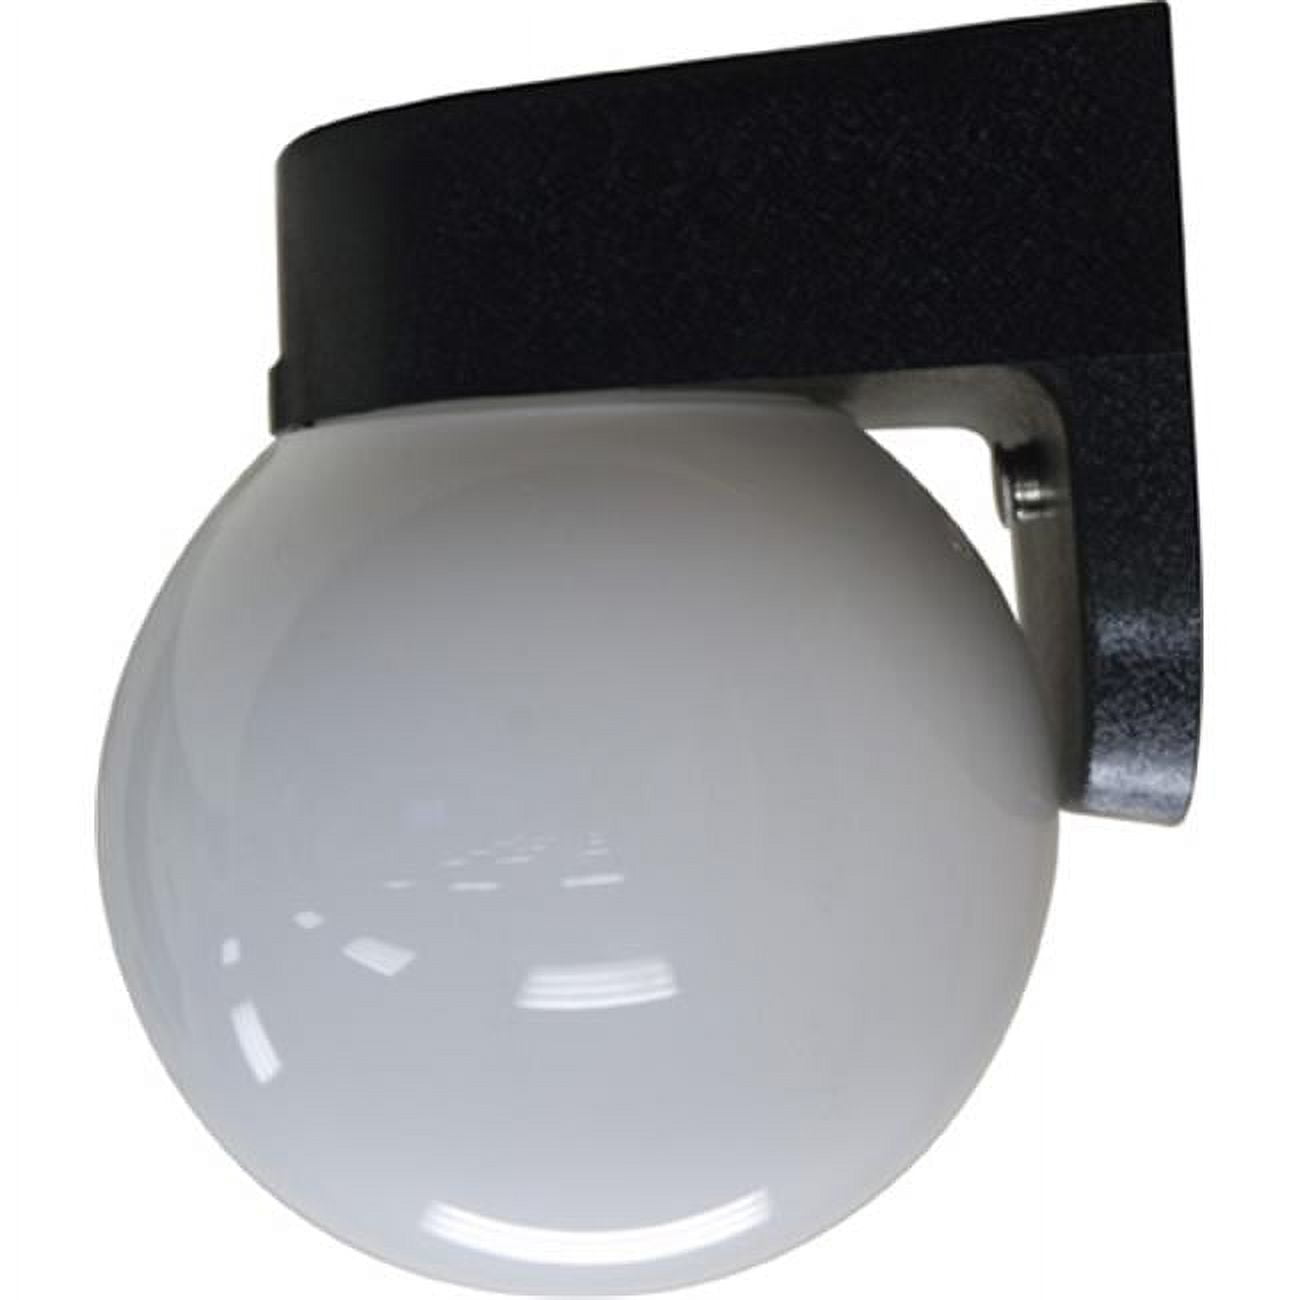 Dabmar Lighting W2200-B 7.25 x 5.88 x 5.63 in. 120 V 60 watts Incandenscent Type Polycarbonate Surface Mounted Wall Fixture Light, Black